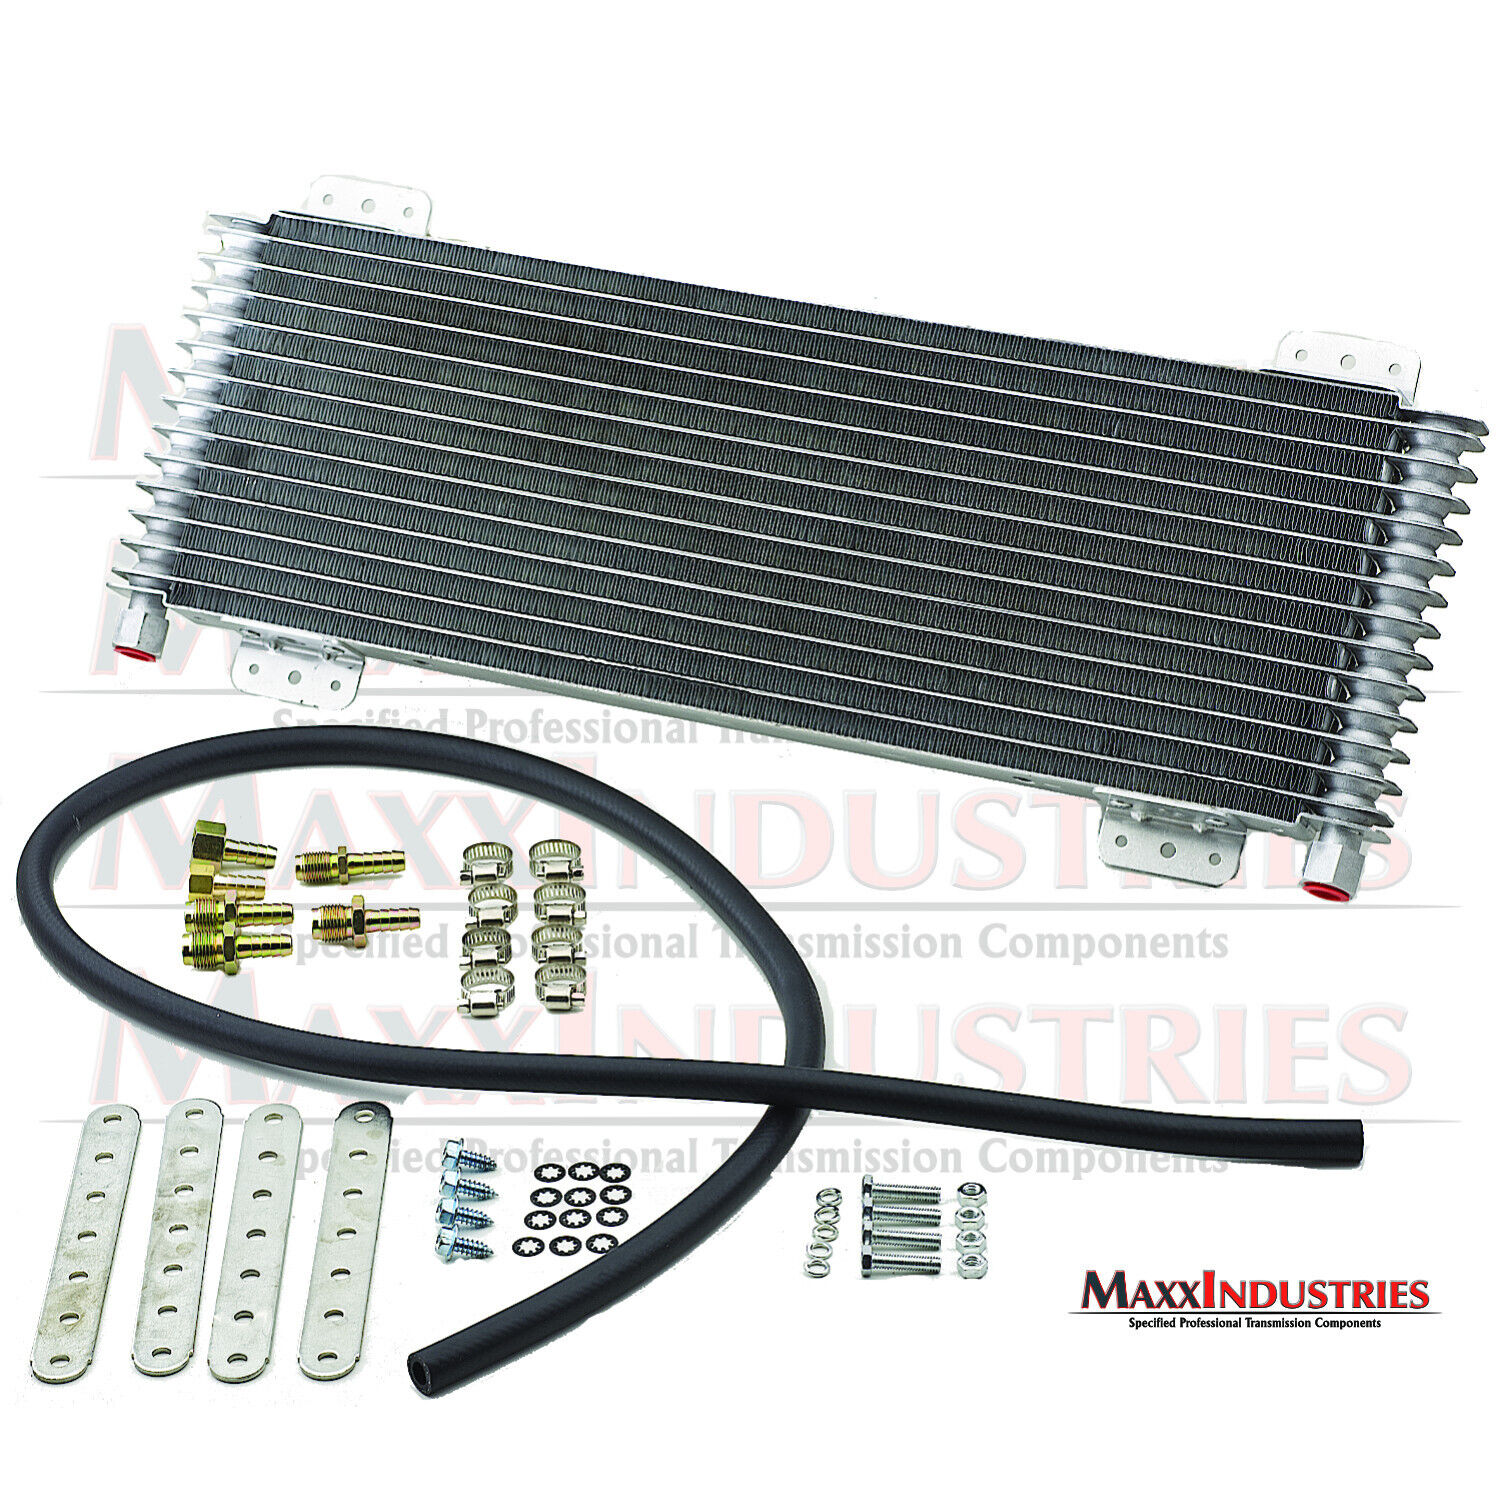 Low Pressure Drop Transmission Oil Cooler LPD47391 40,000 GVW with Mounting